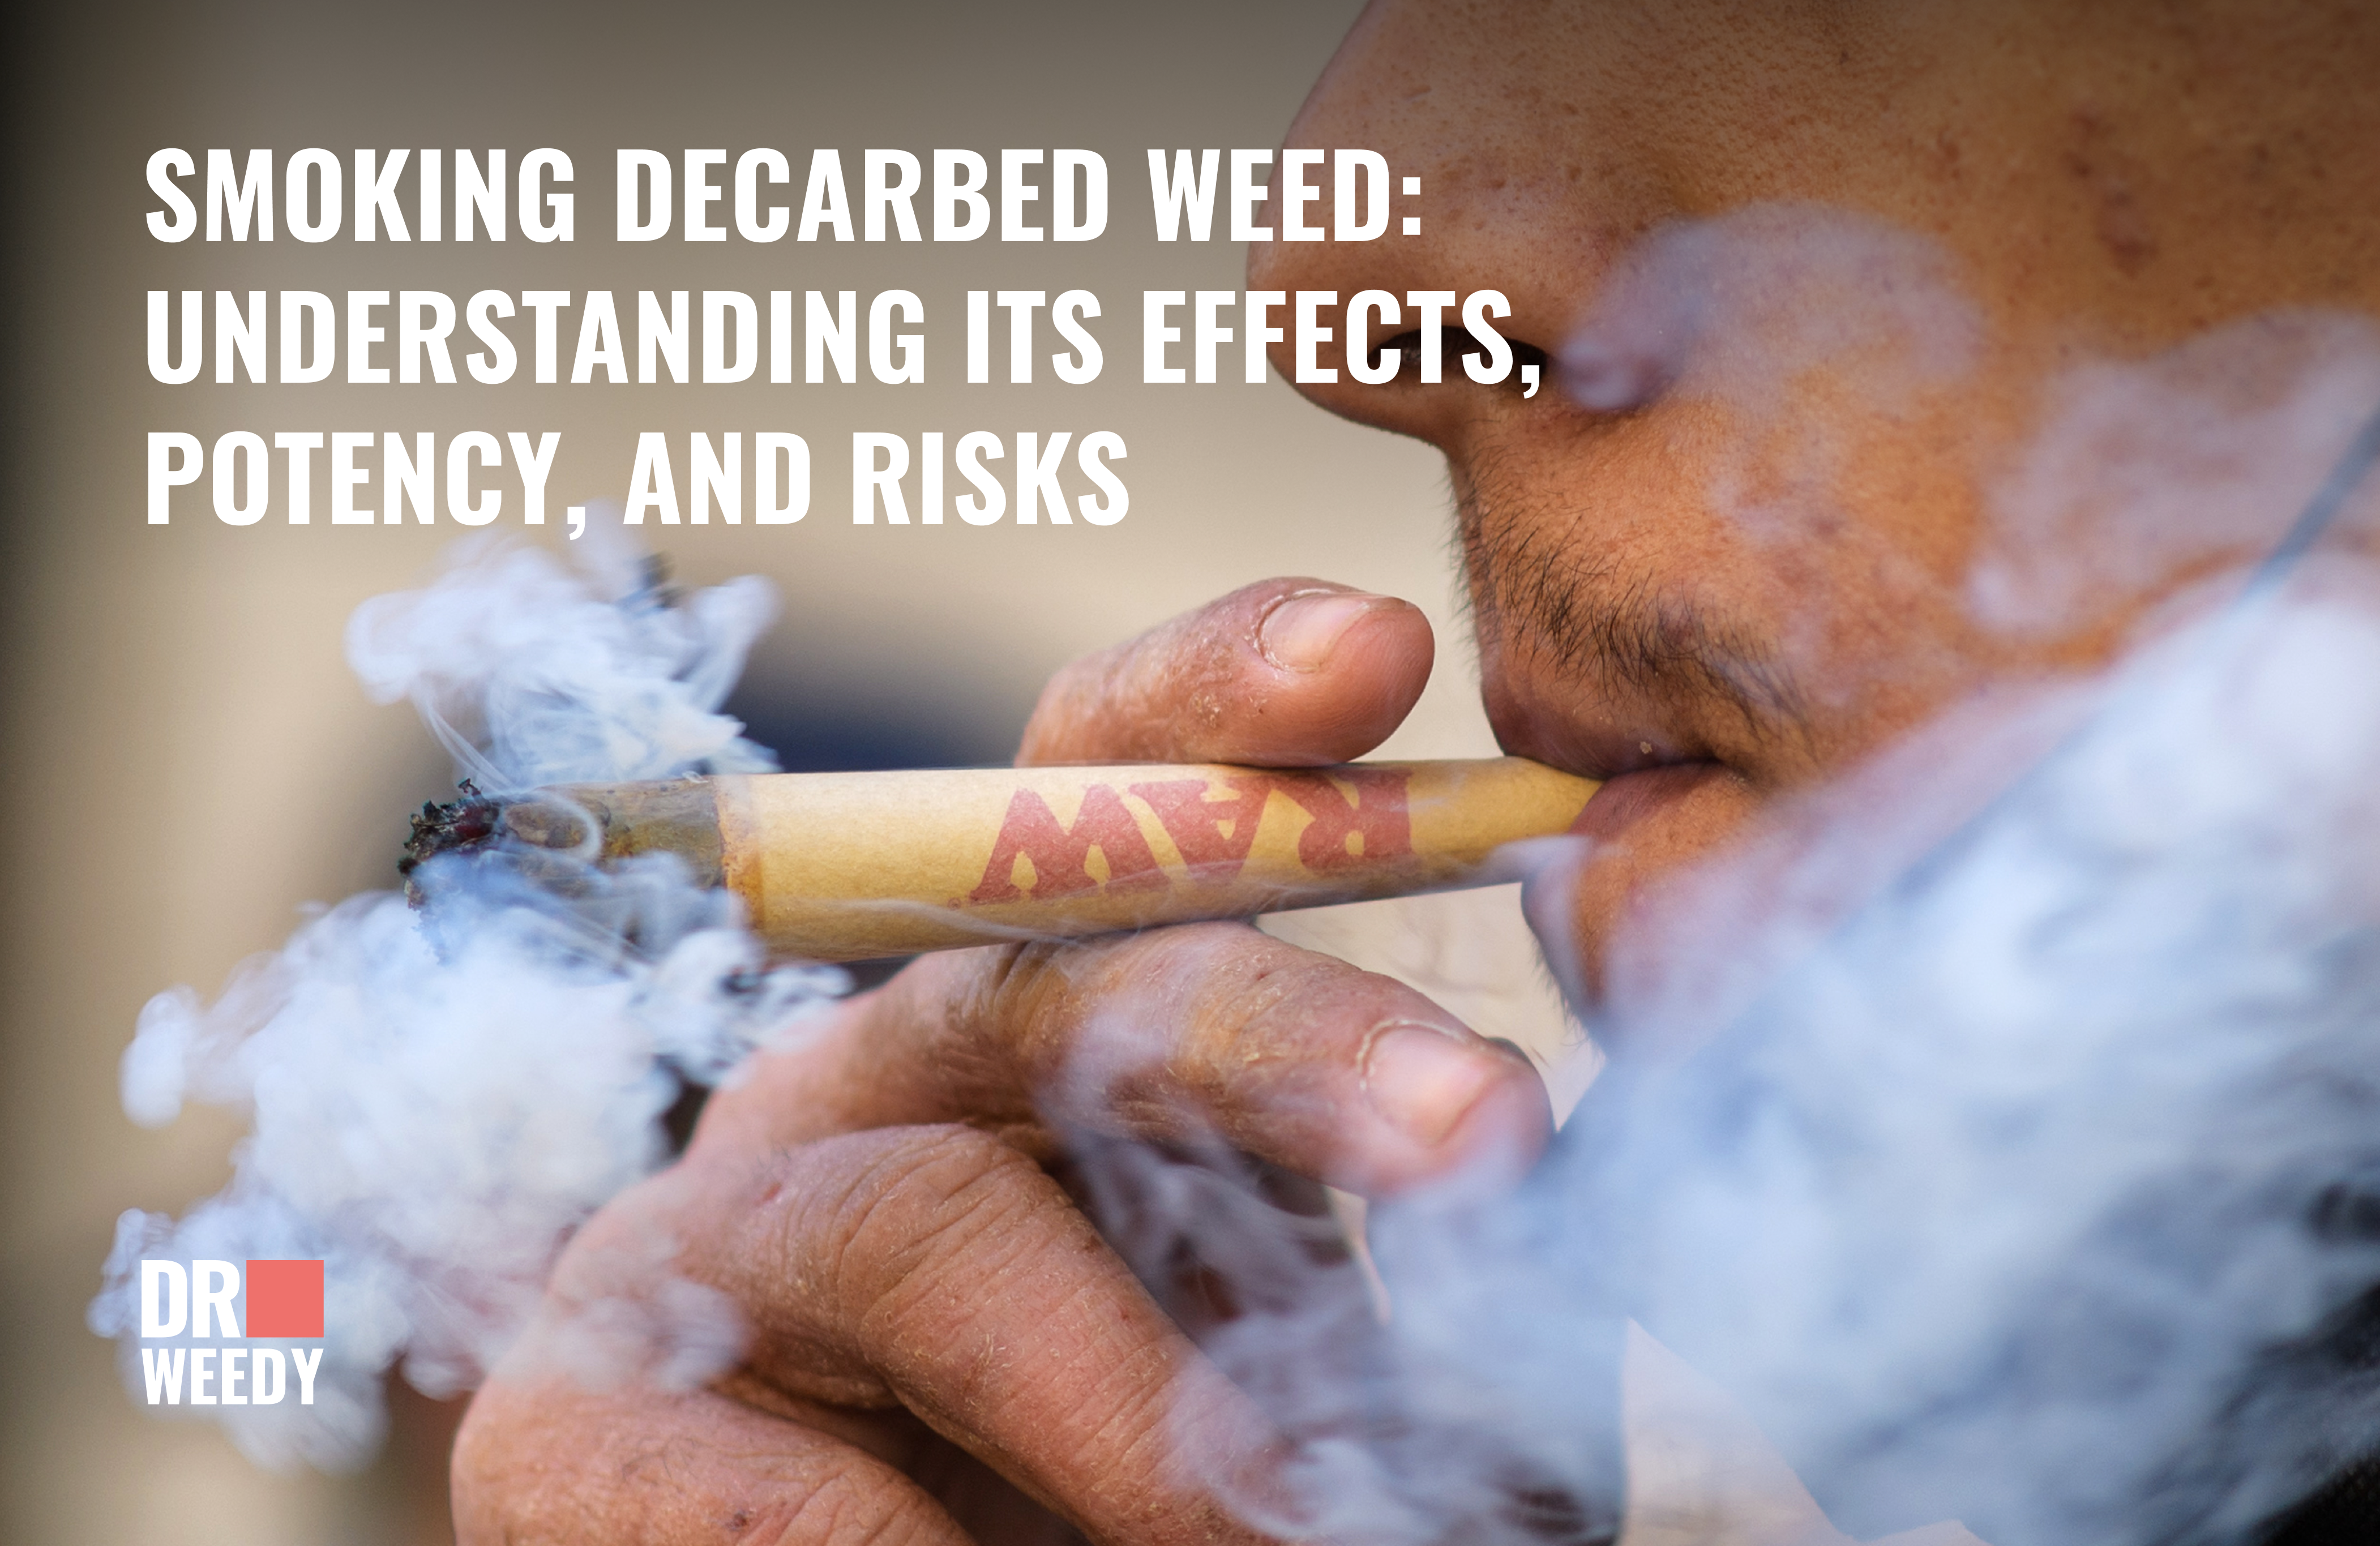 Can You Smoke Decarbed Weed? Exploring Risks and Potency